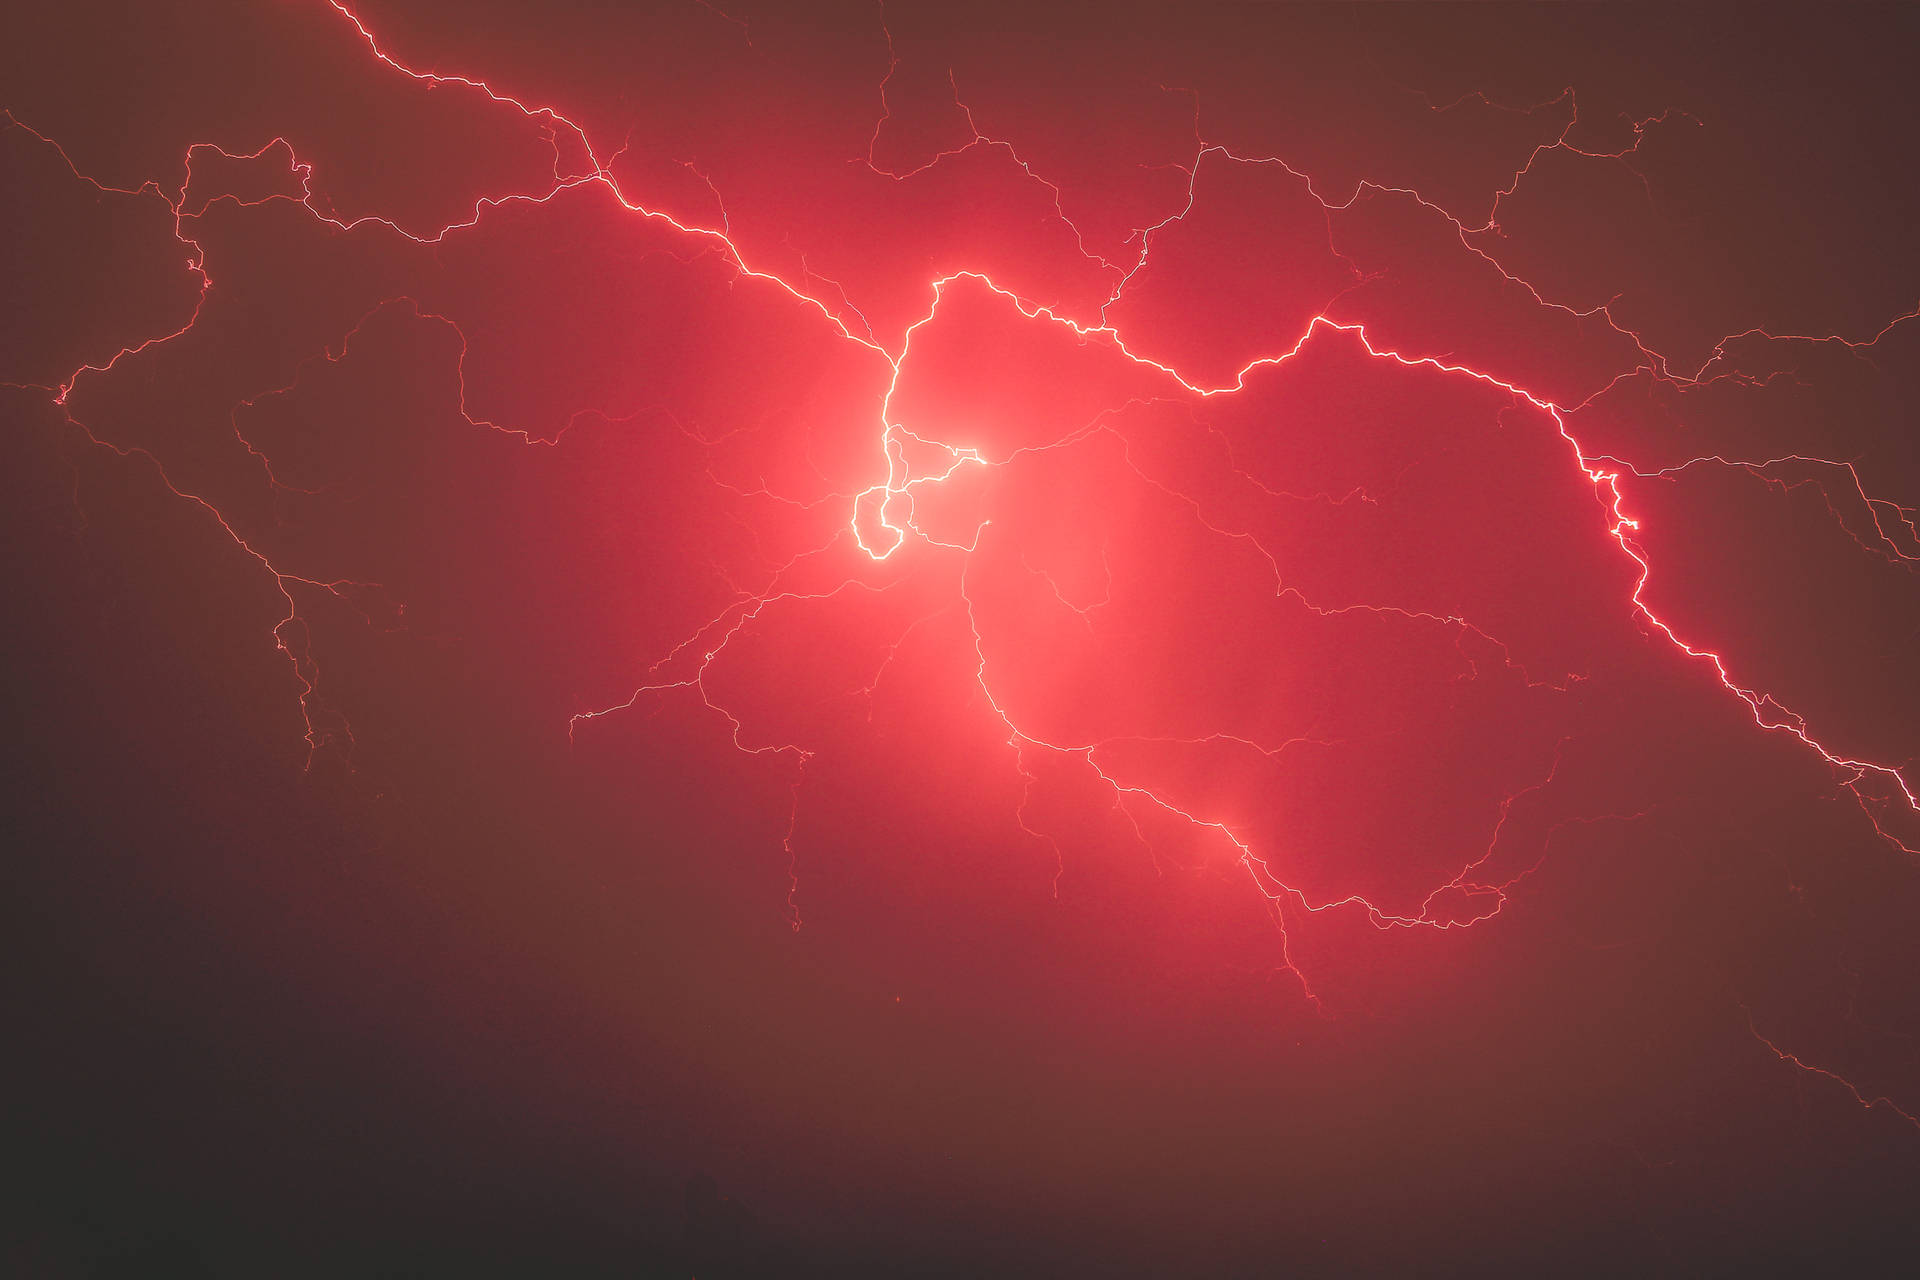 "A Powerful Display of Red Lightning" Wallpaper